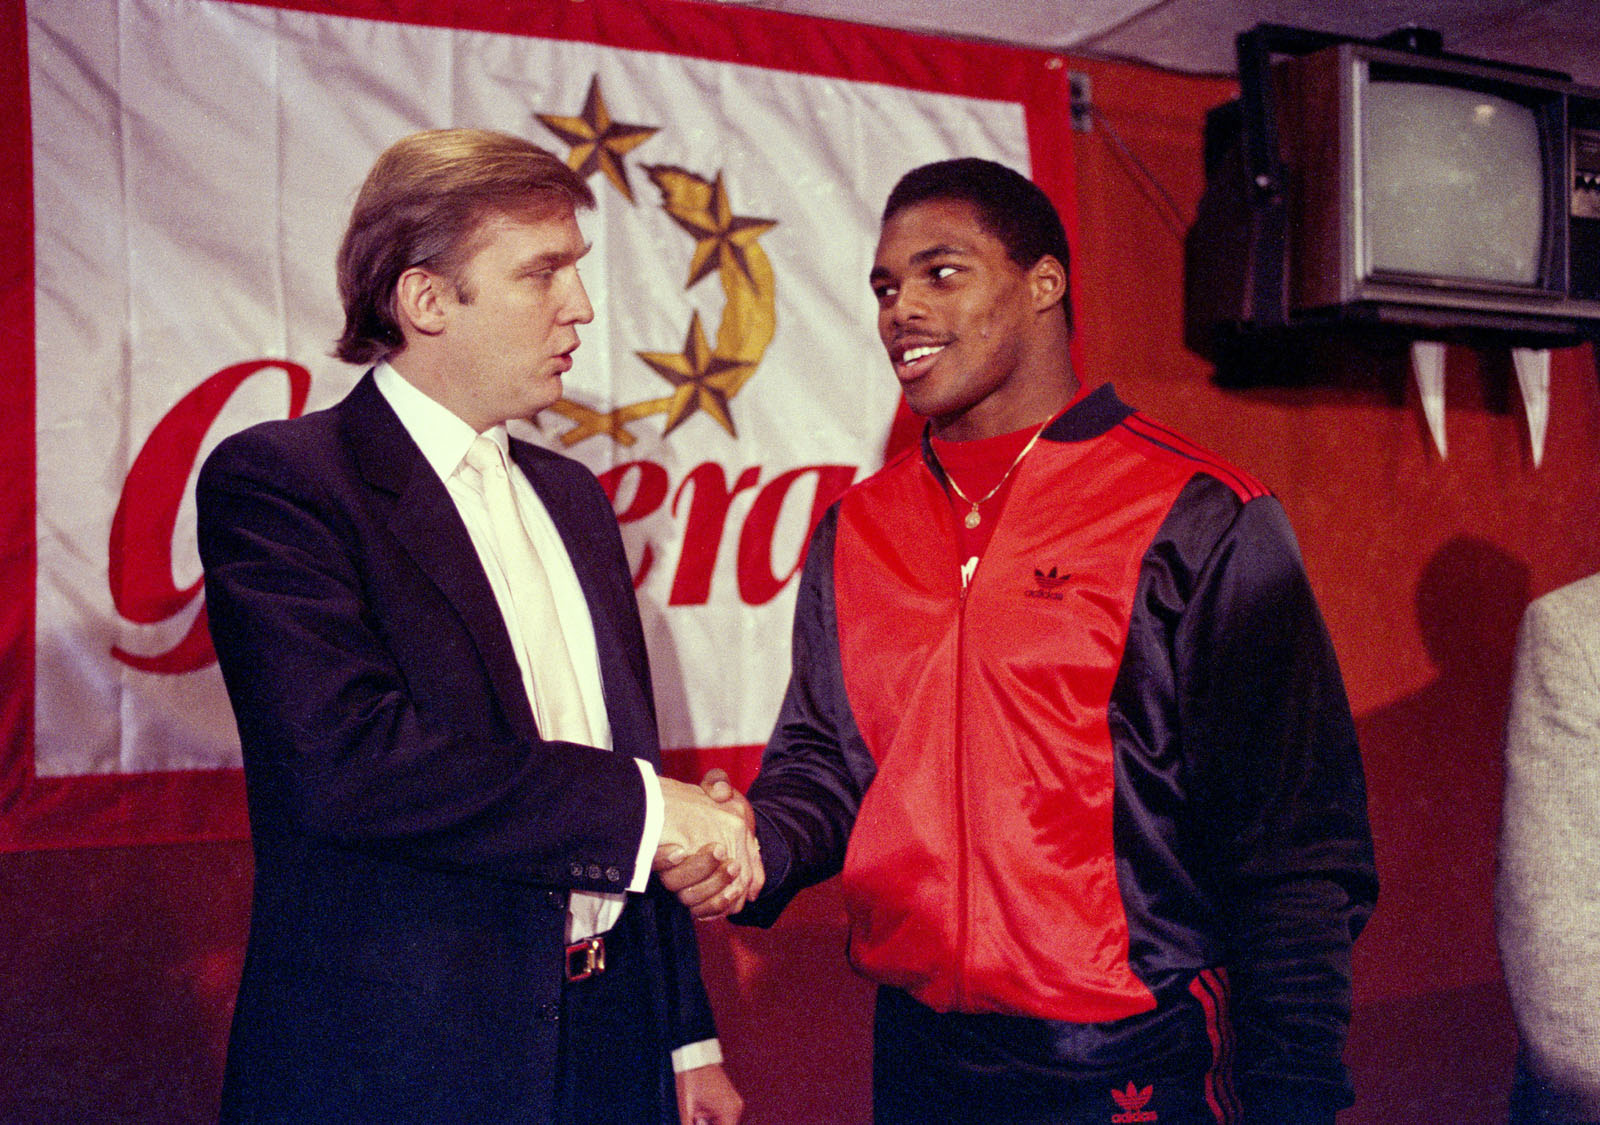 FILE - In this March 8, 1984, file photo, then-New Jersey Generals owner Donald Trump, left, shakes hands with Herschel Walker at a press conference in New York, after agreeing on a 4-year contract. Retired NFL player Herschel Walker says he's being dropped from speaking engagements because of his relationship with Donald Trump. (AP Photo/Dave Pickoff, File)